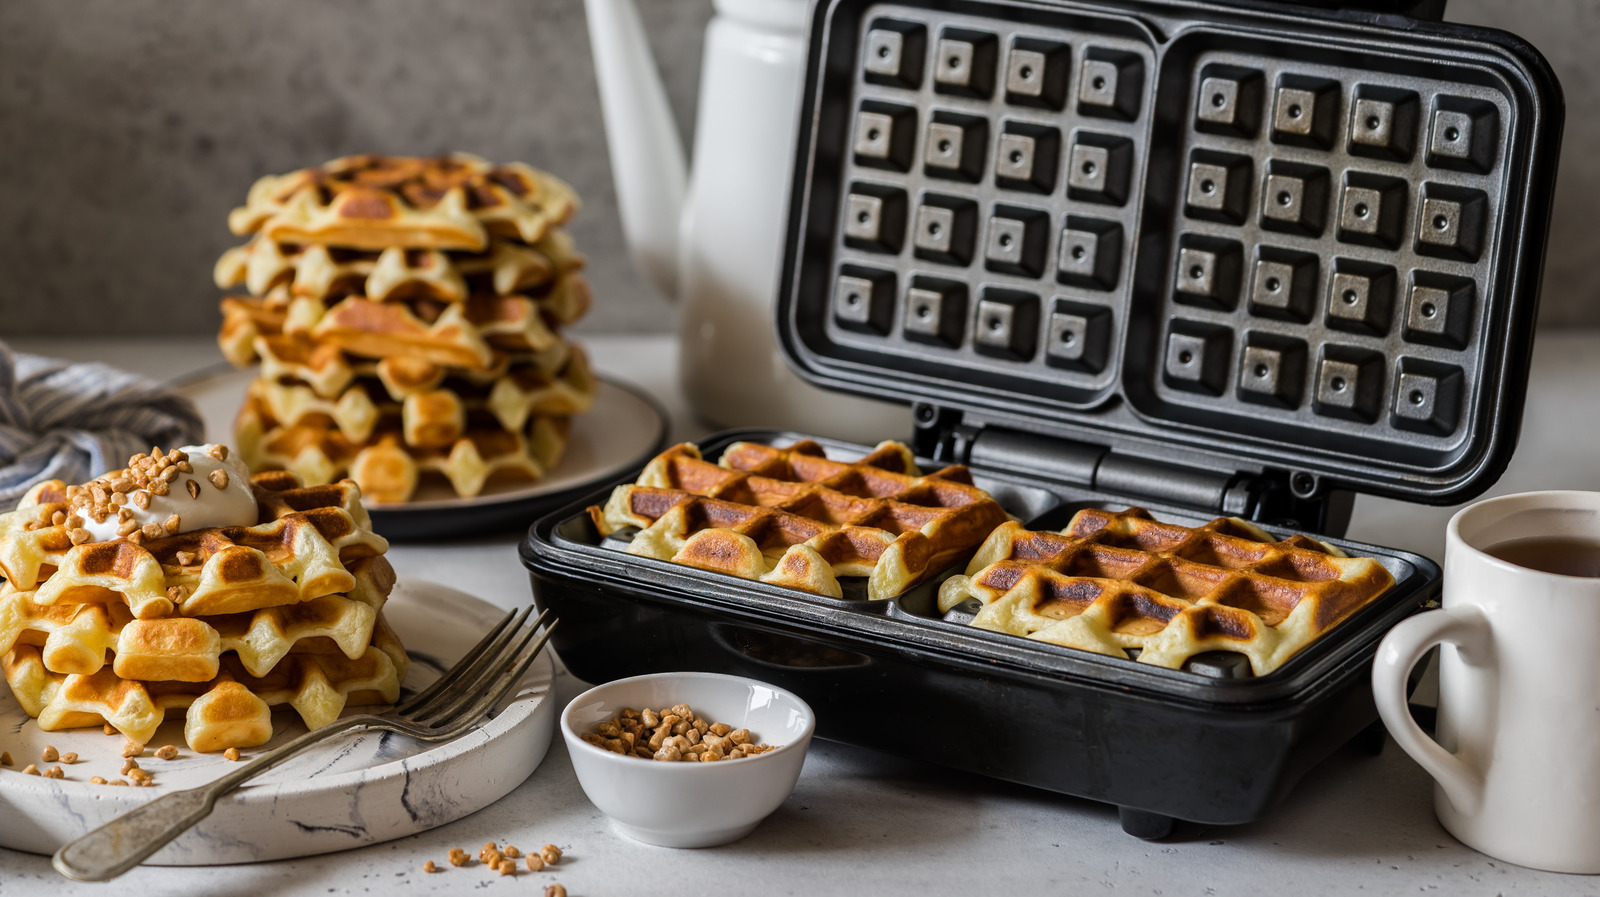 A Brief History of the Waffle Iron, Innovation